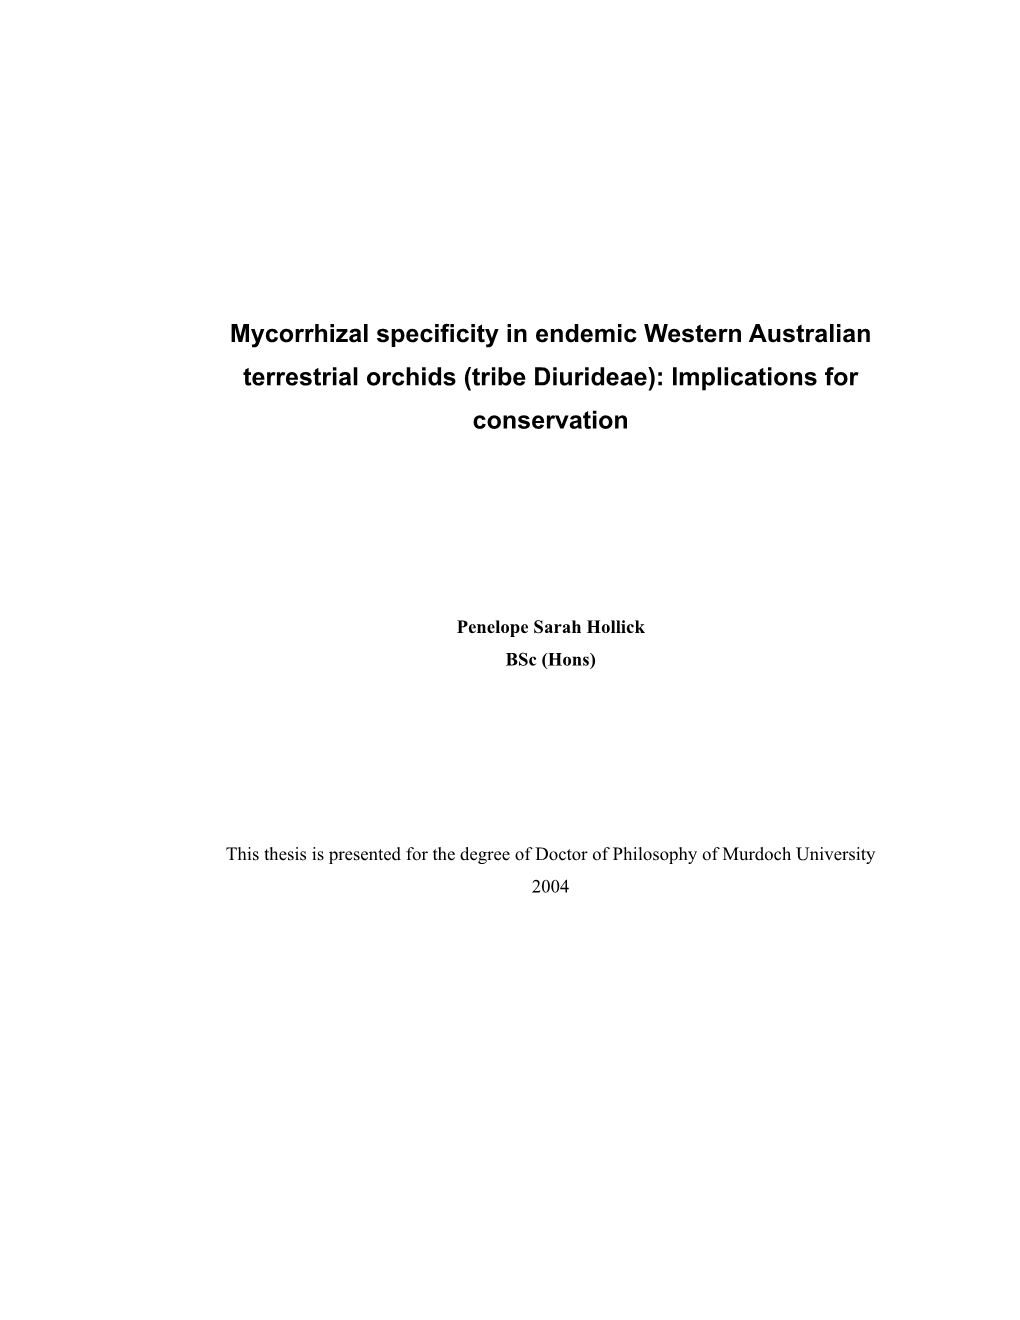 Mycorrhizal Specificity in Endemic Western Australian Terrestrial Orchids (Tribe Diurideae): Implications for Conservation